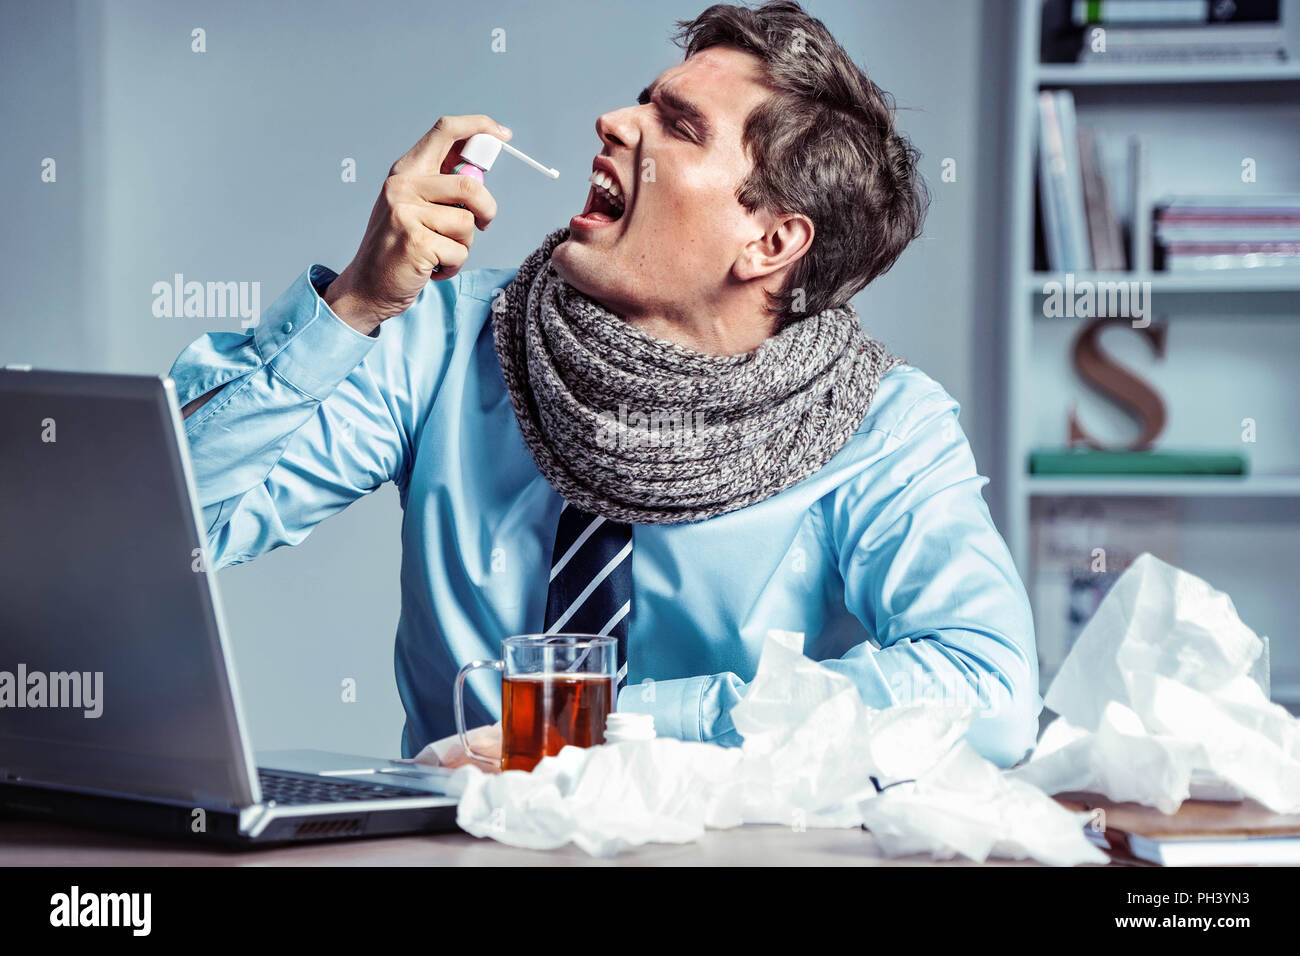 Sick employee using spray for throat. Photo of young man in office suffering virus of flu. Medical concept. Stock Photo